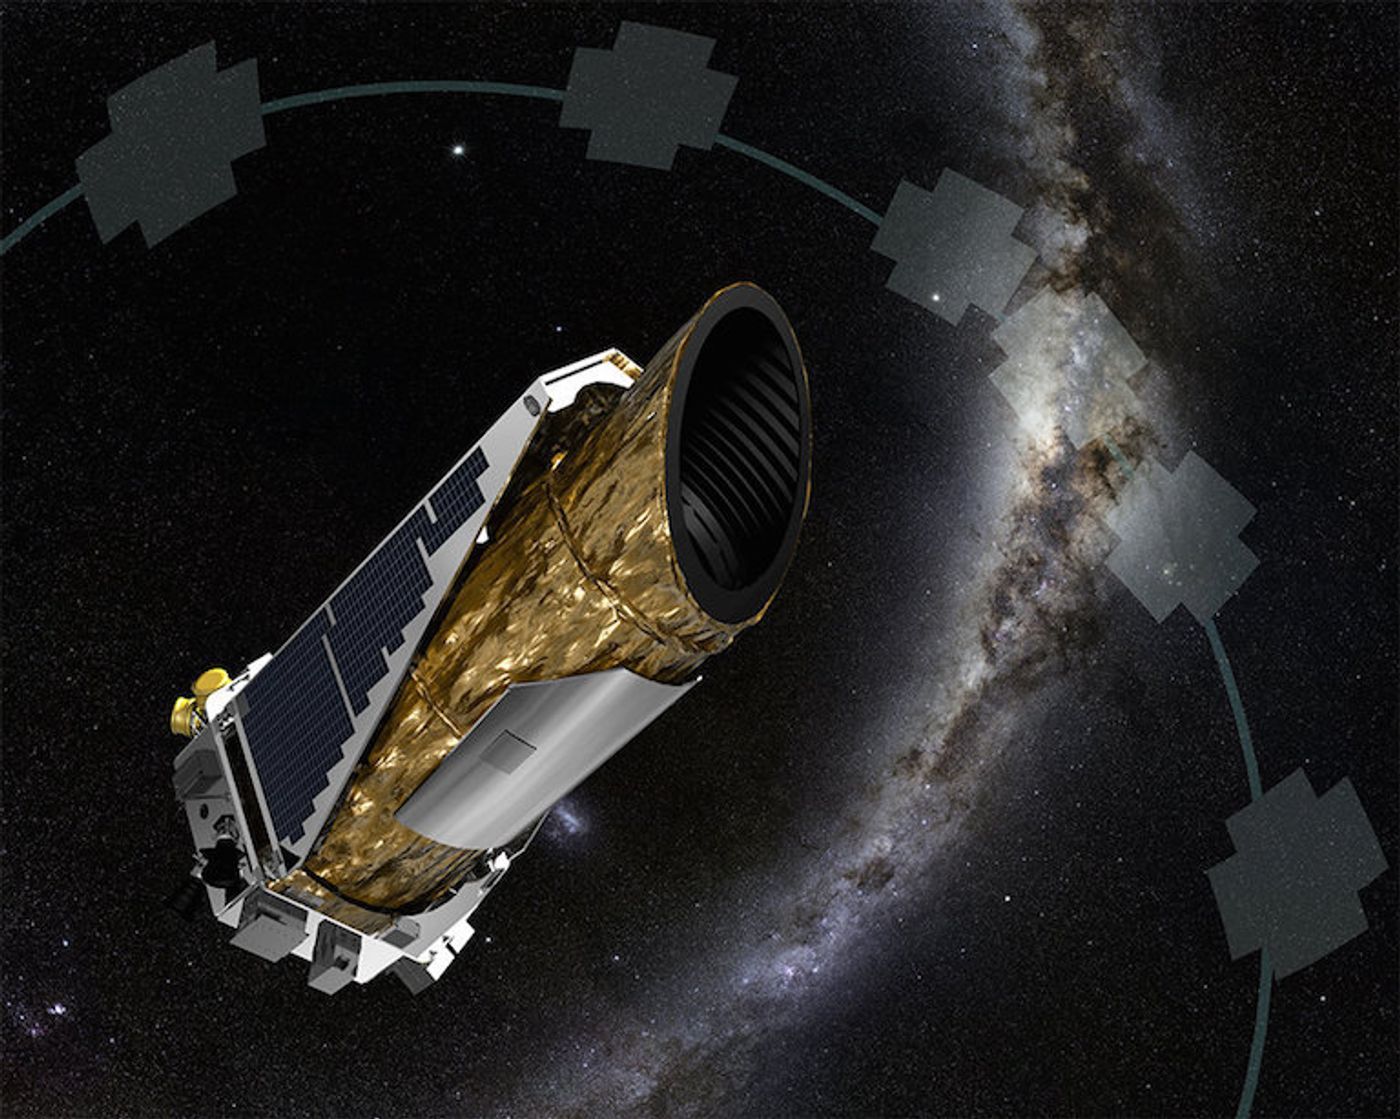 An artist's rendition depicting the Kepler Space Telescope.